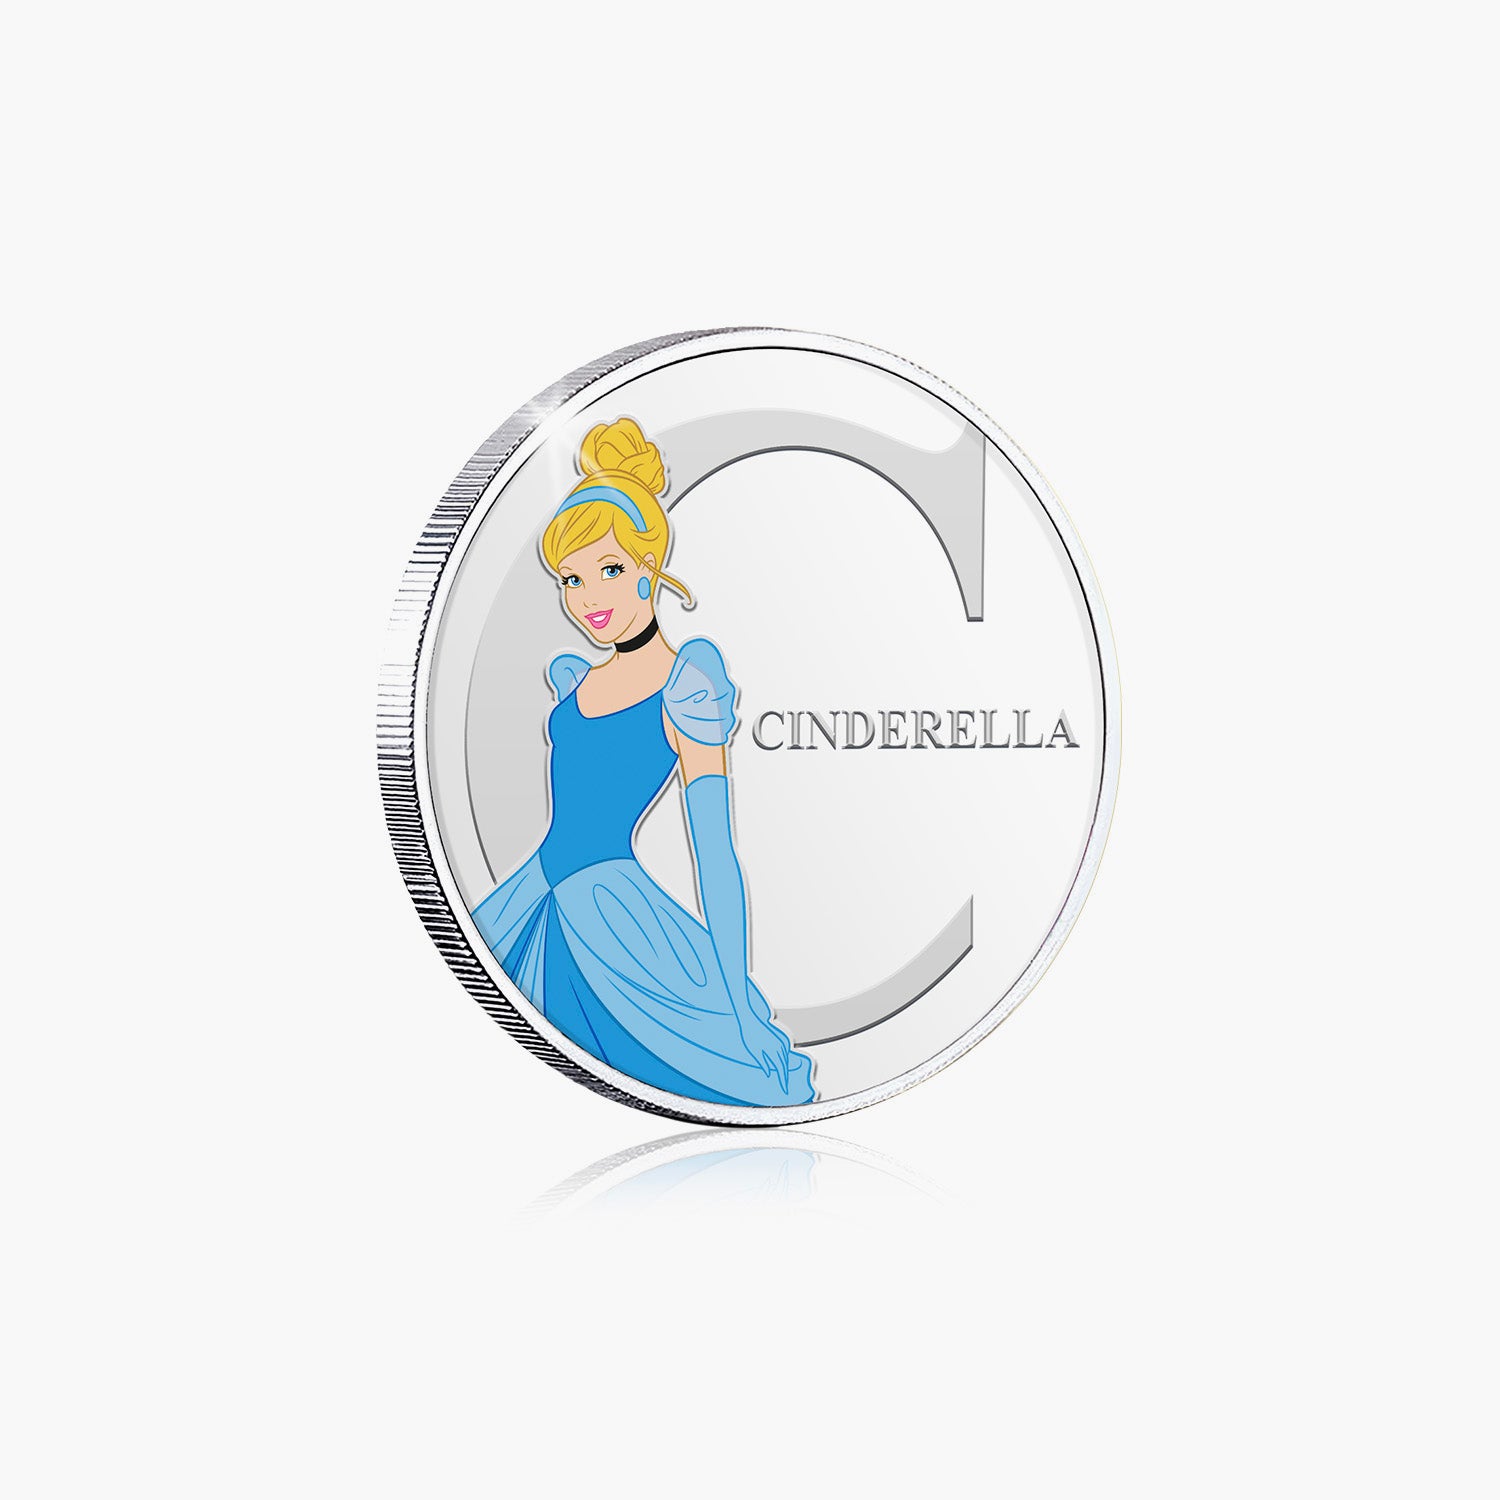 C is for Cinderella Silver-Plated Full Colour Commemorative